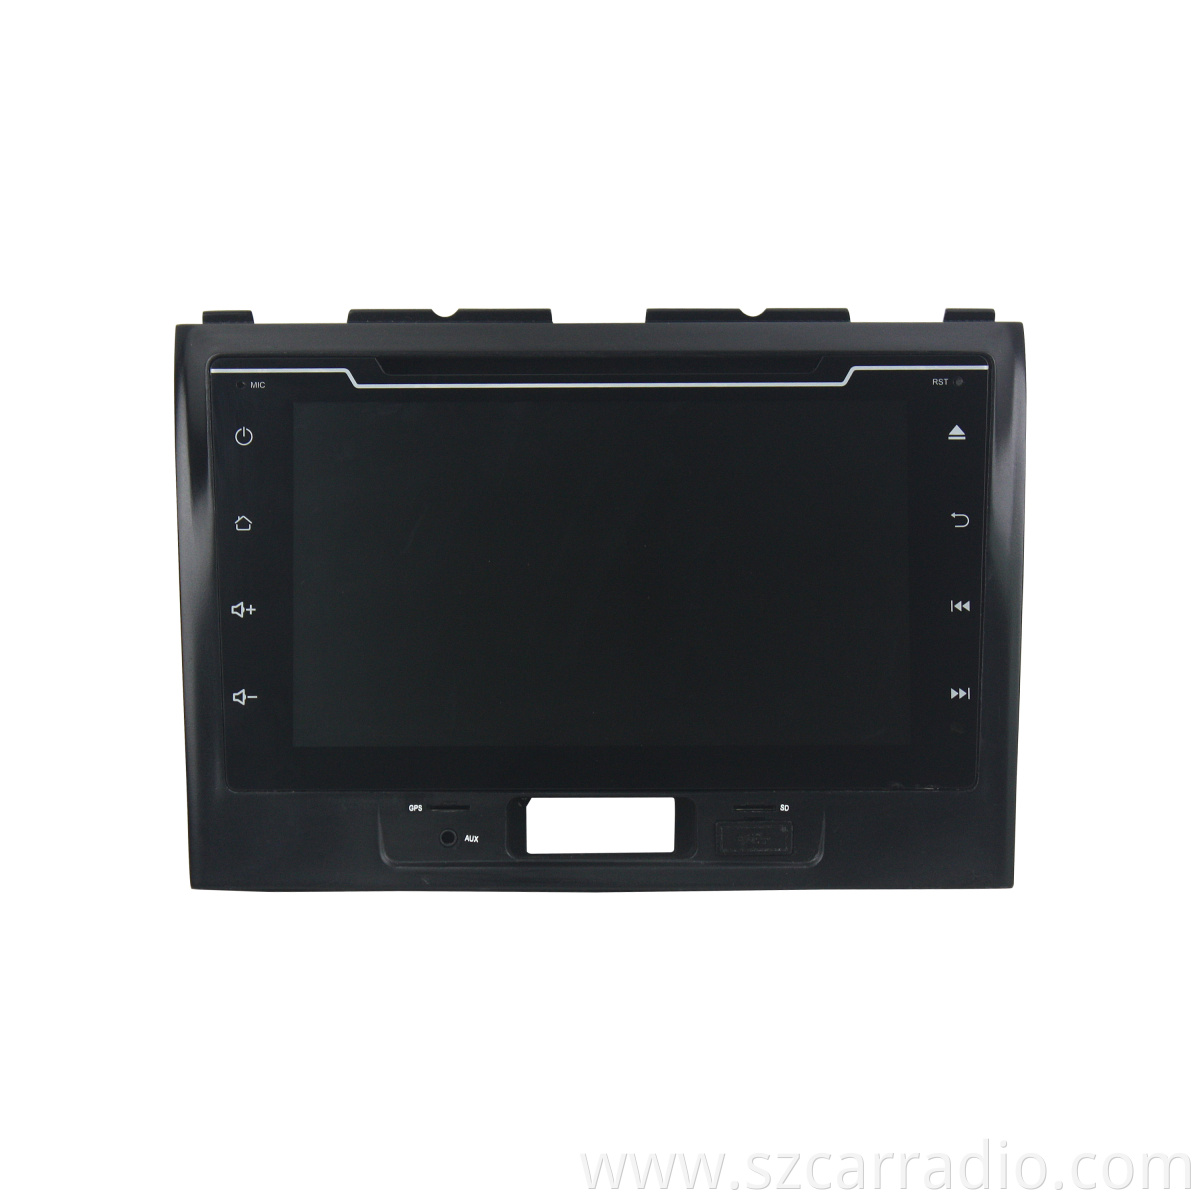 dvd player for Wagon R